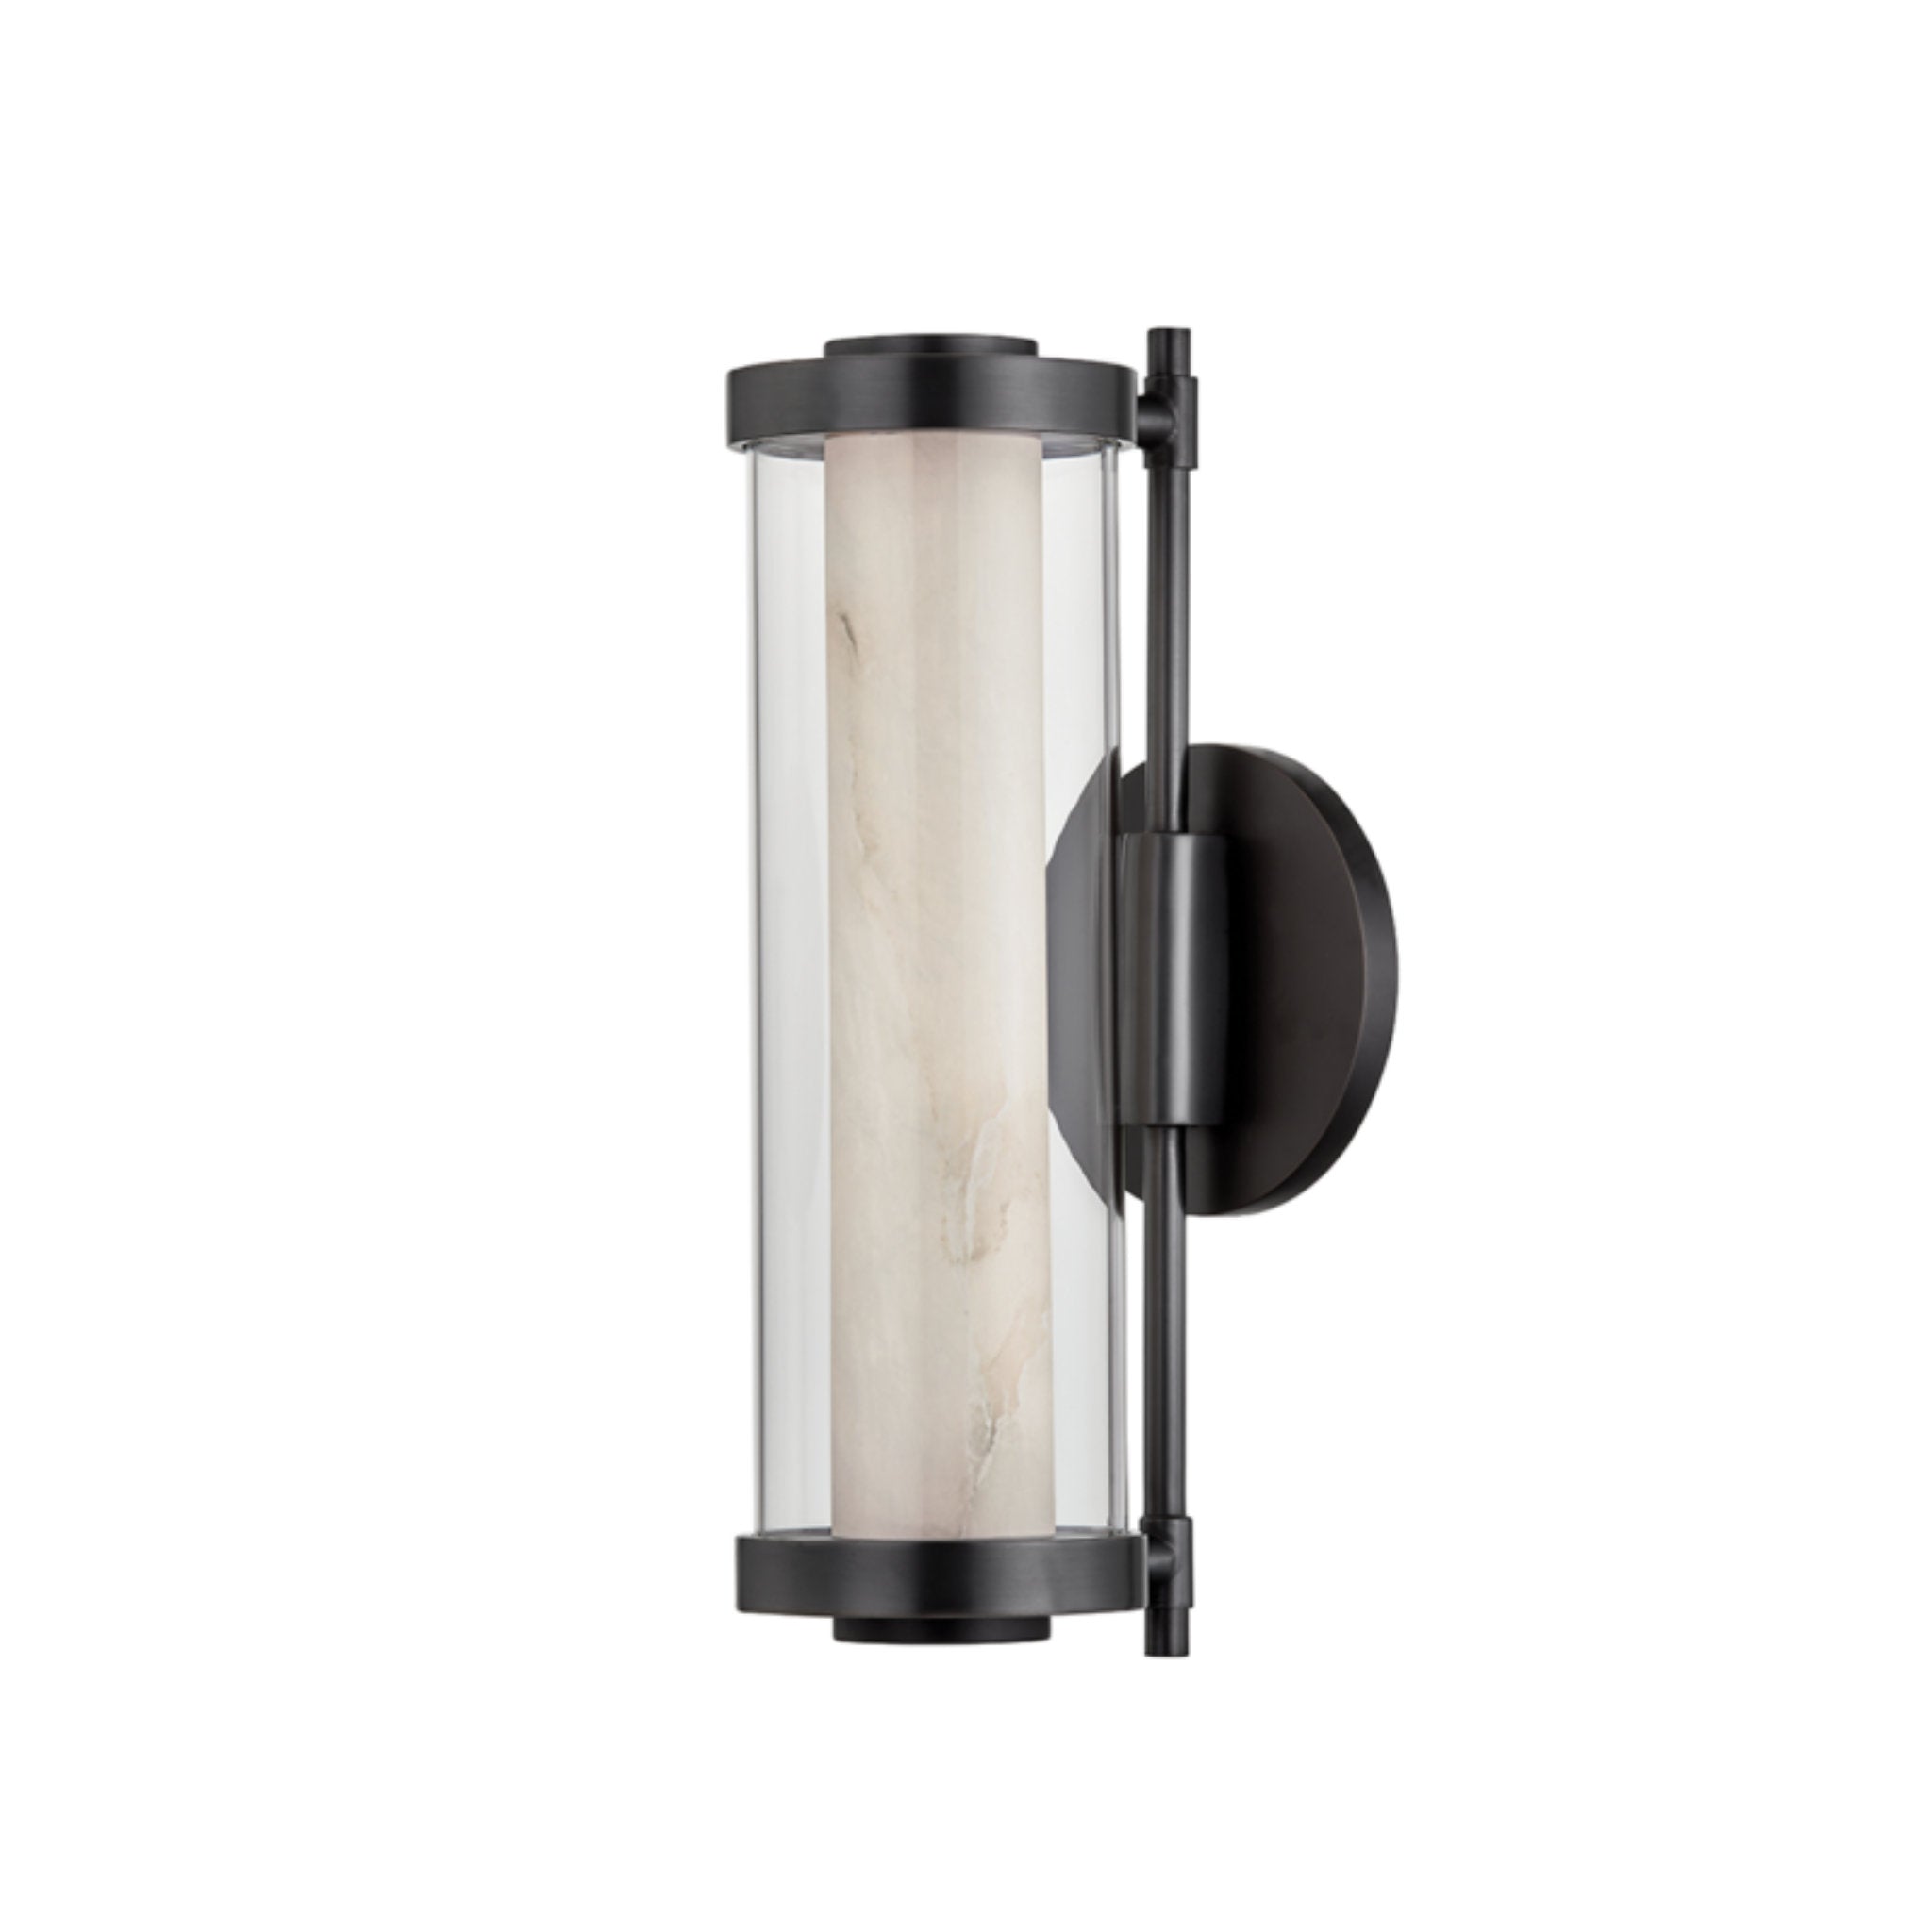 Caterina 1 Light Wall Sconce in Black Brass